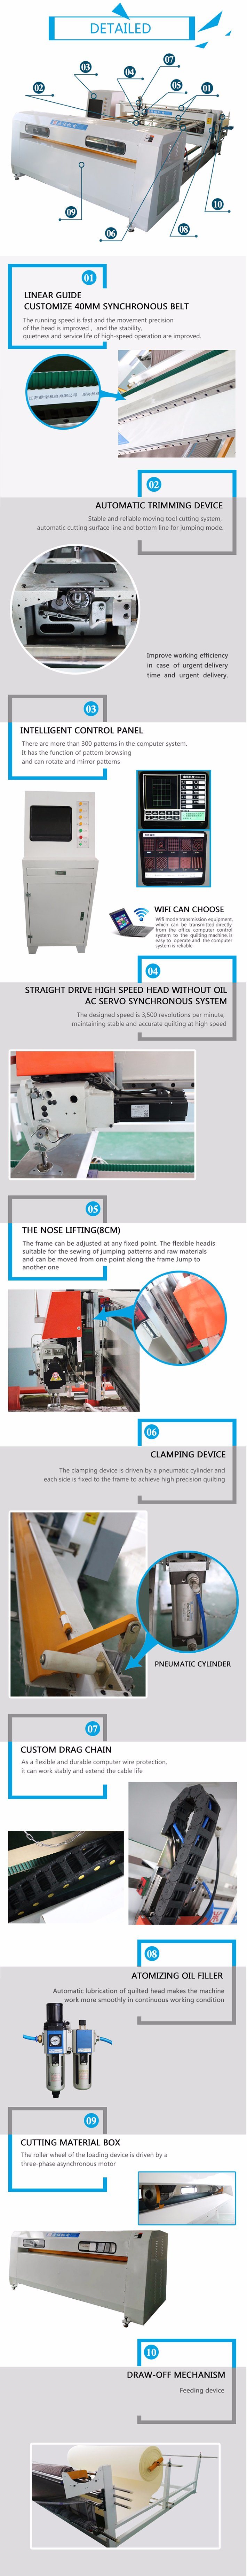 Dn-6 Automatic Single Needle Quilting Machine